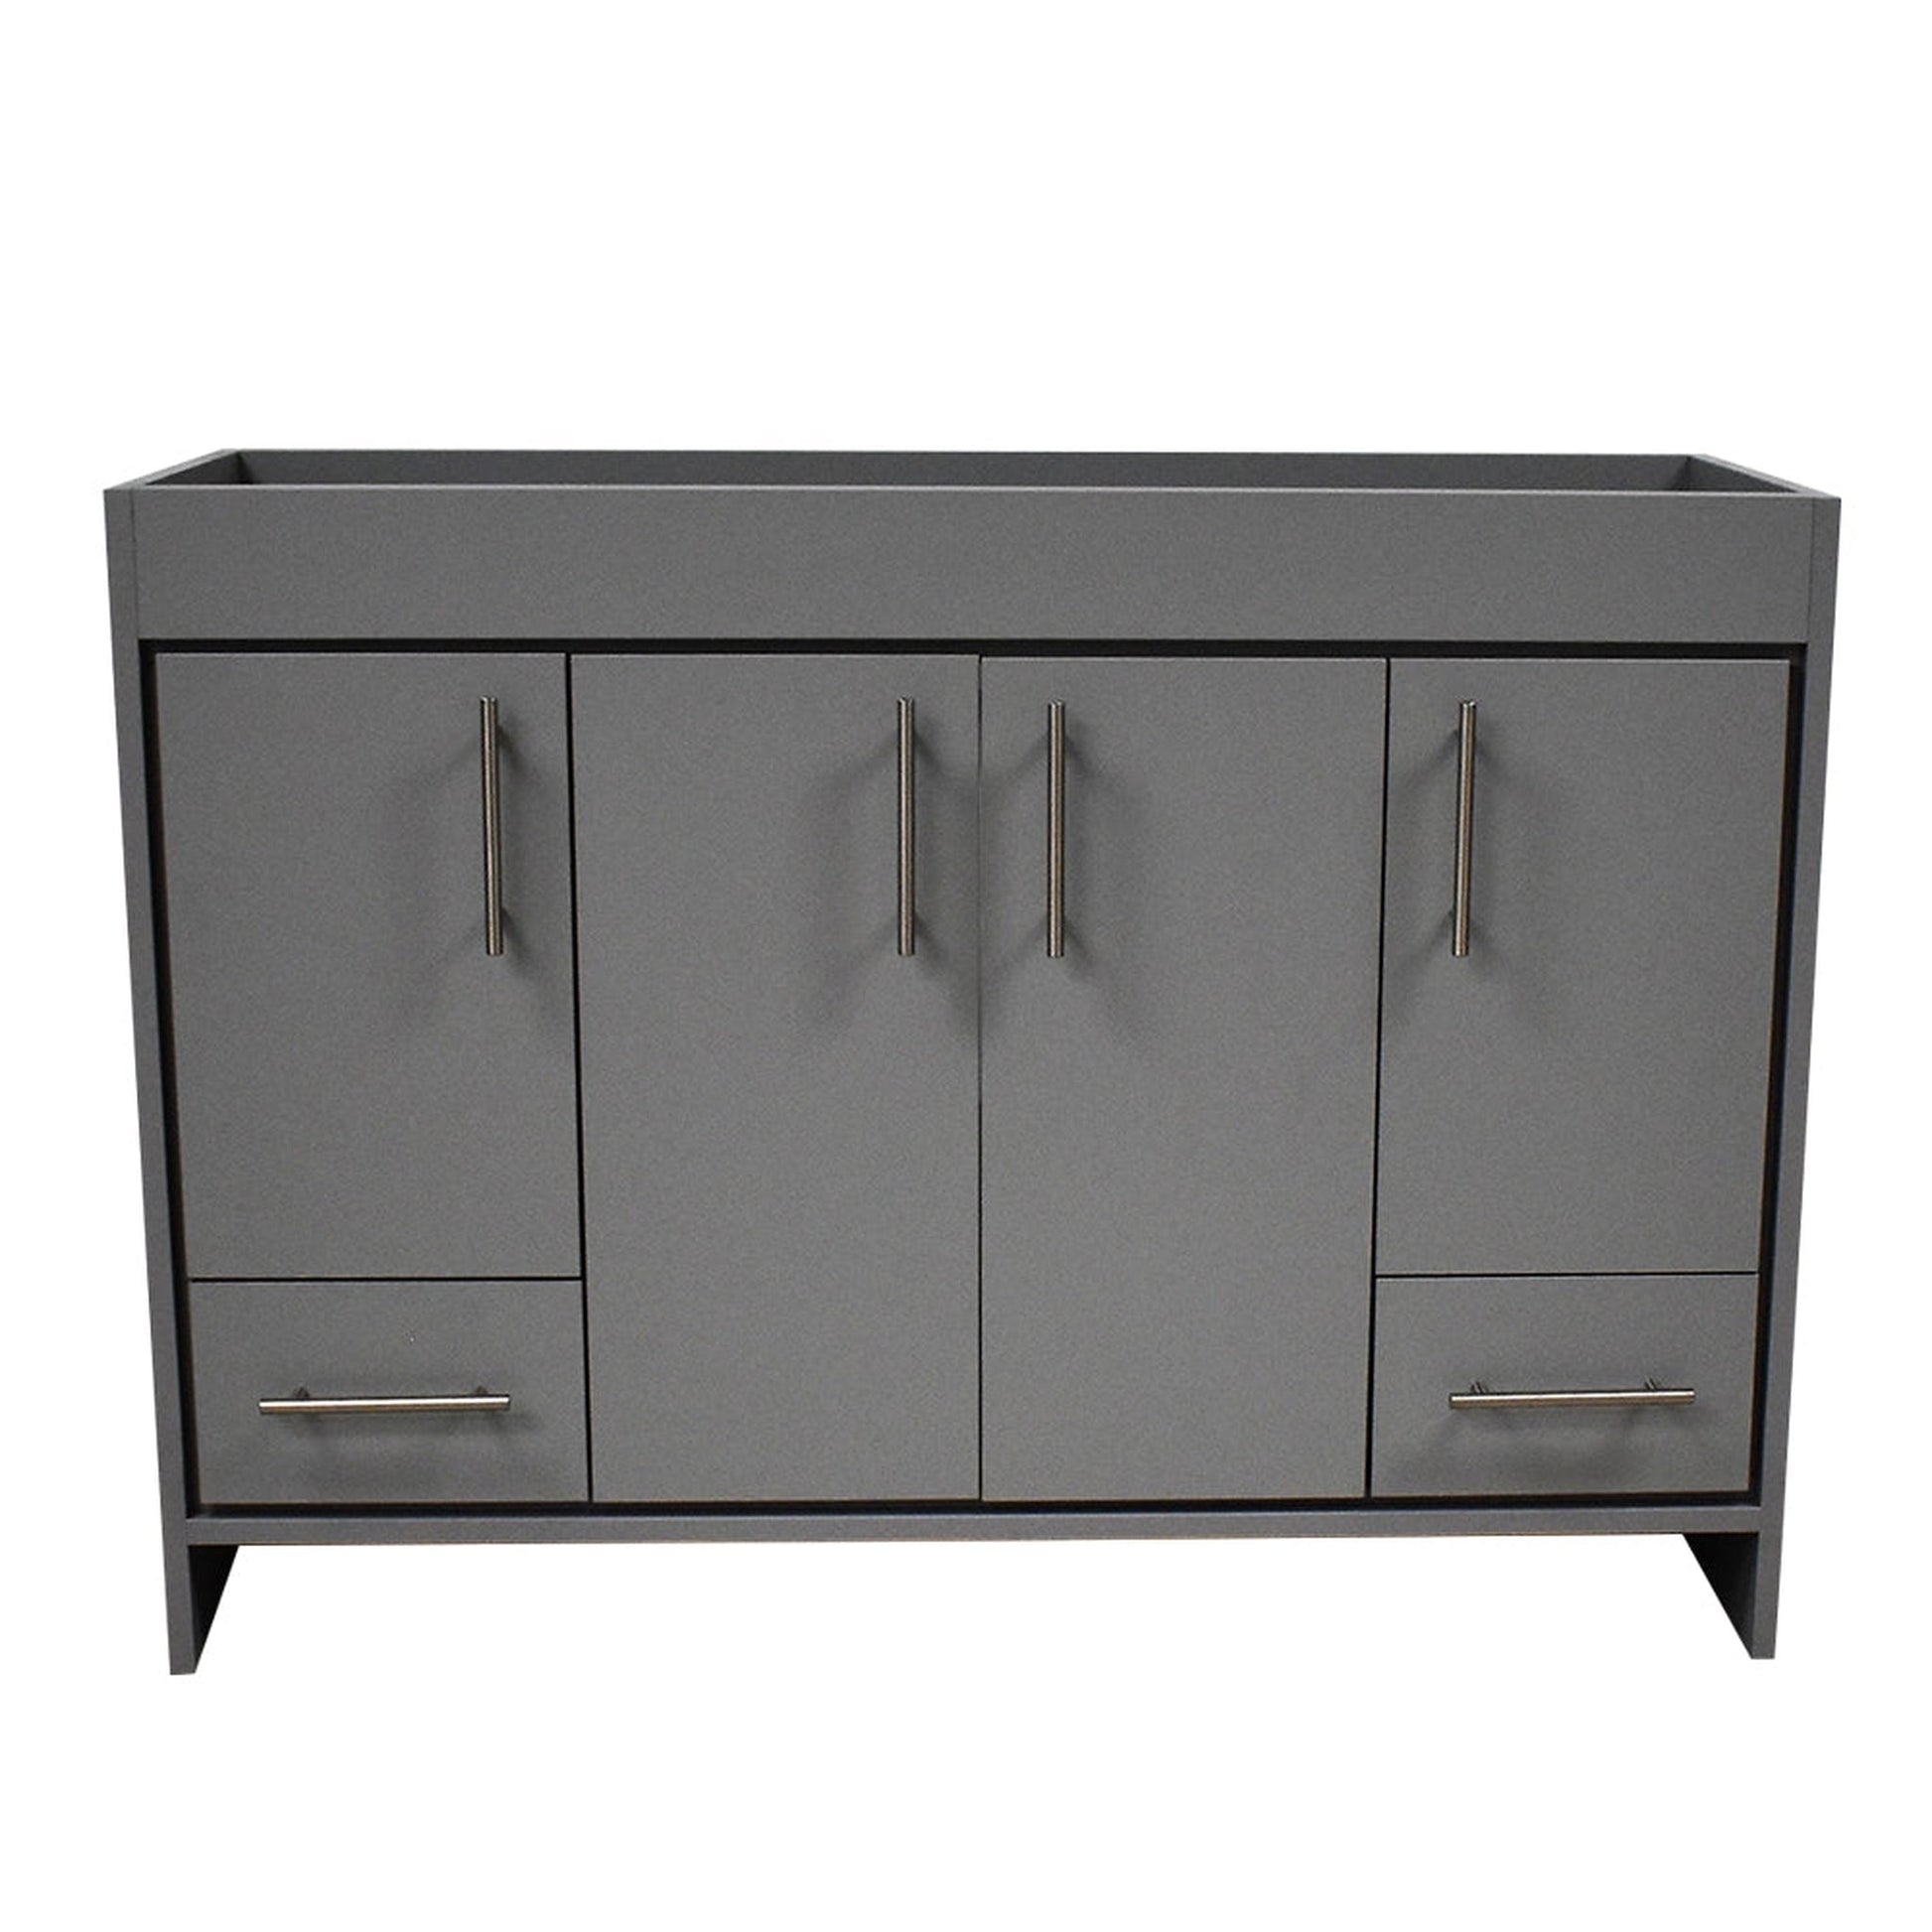 Volpa USA Pacific 48" Gray Freestanding Modern Bathroom Vanity With Brushed Nickel Round Handles Cabinet Only